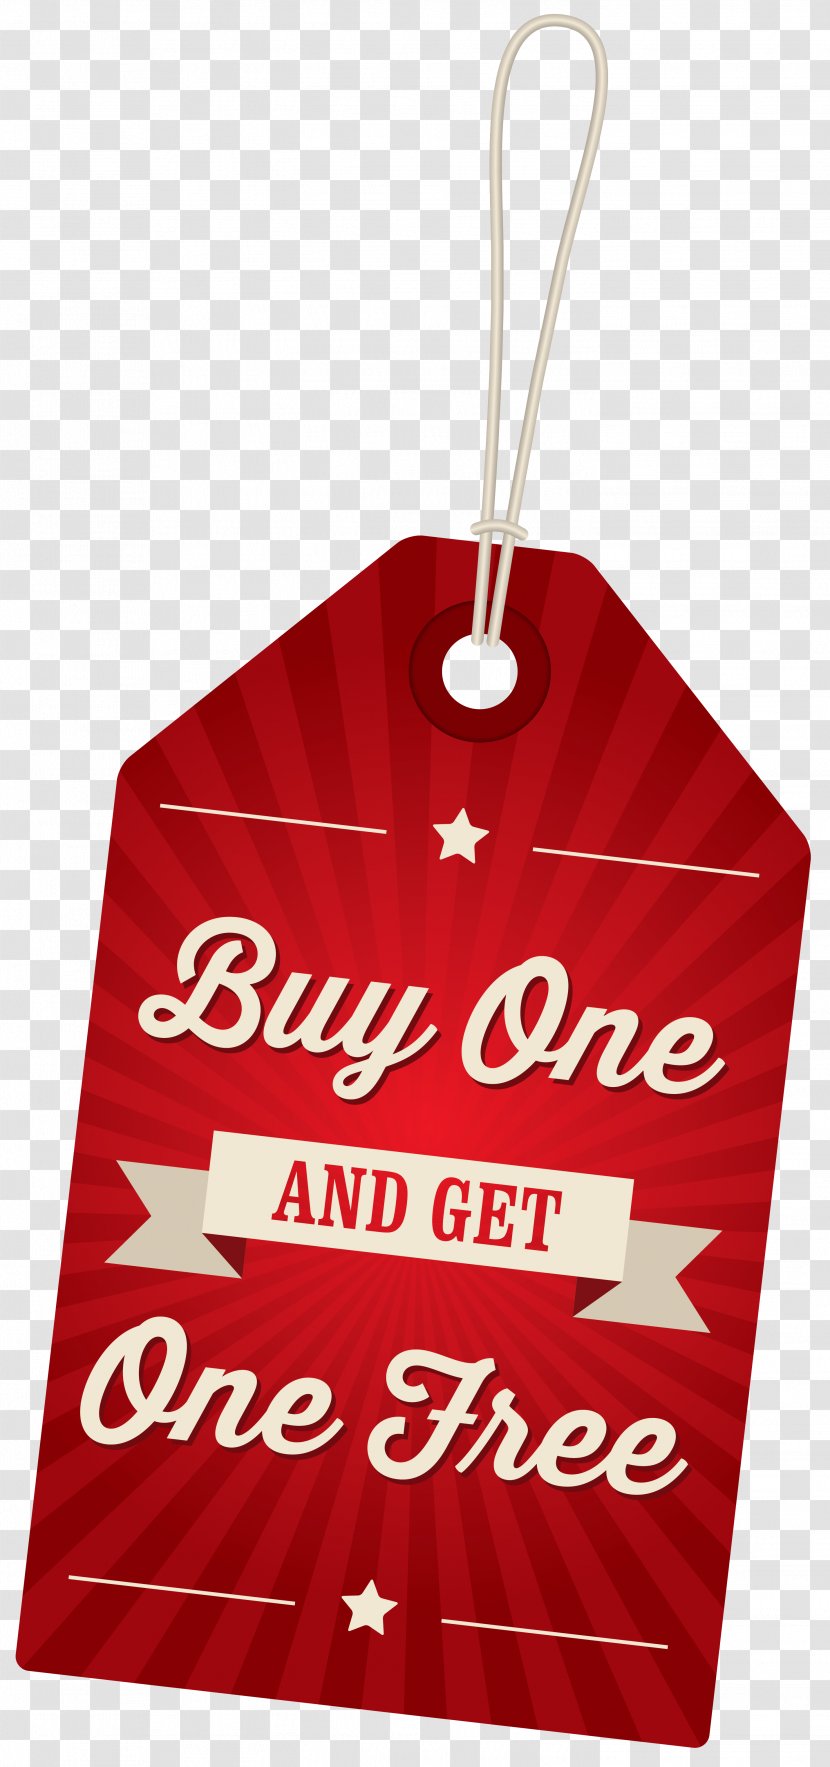 Buy One, Get One Free Buffet Clothing Icon - Label Clipart Image Transparent PNG